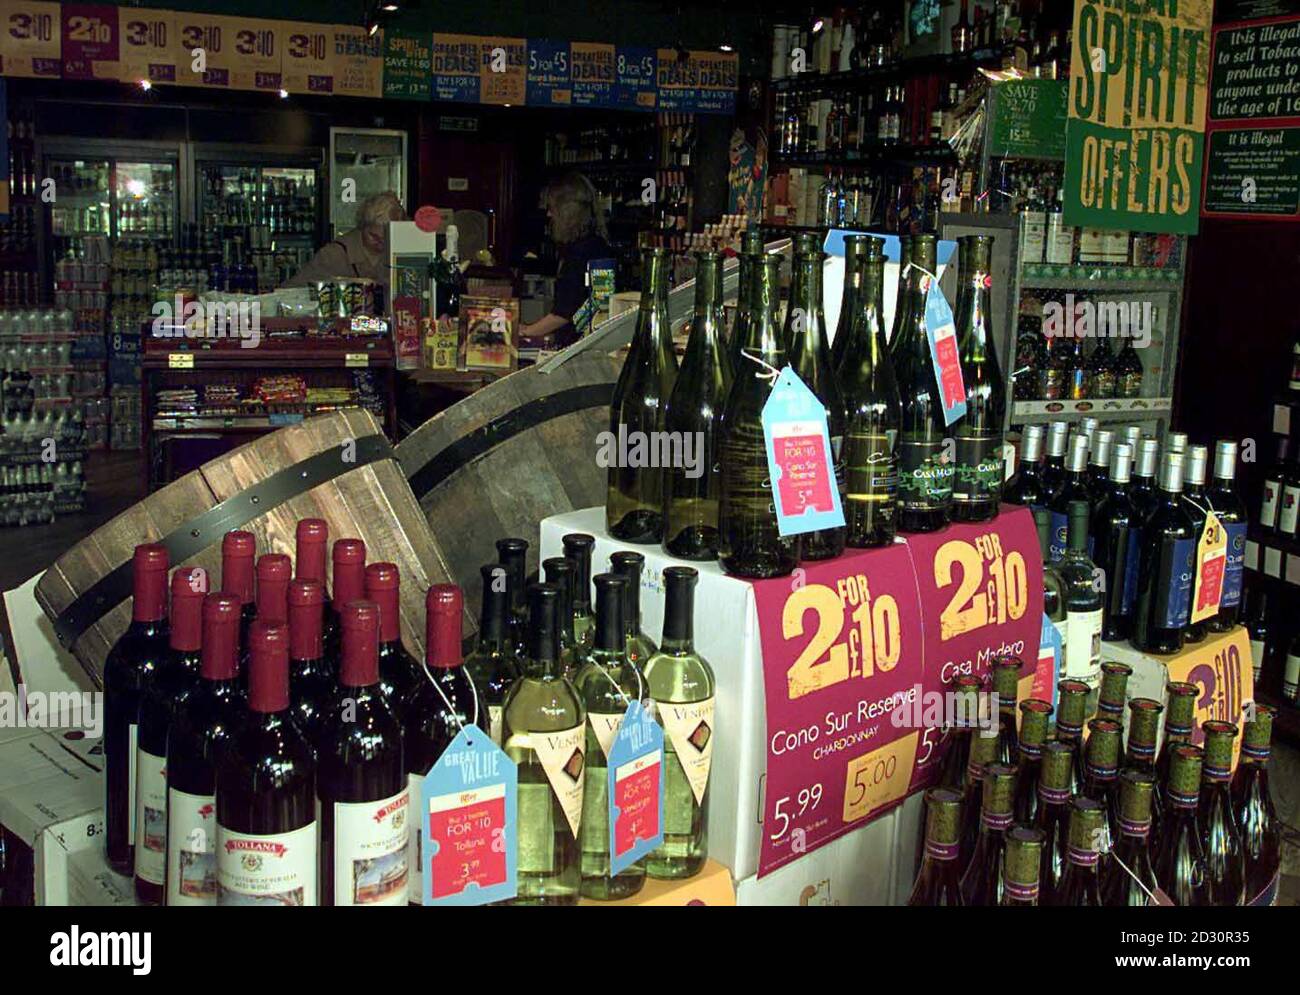 Bottles of wine on display at an Off Licence in Ashby De La Zouch, on the day that Britain's Chancellor Gordon Brown announced in his Budget that duty on all spirits were frozen, beer to rise 1p a pint and wine to rise 4p a bottle. * 02/7/02: All alcoholic drinks sold in the UK should state how many units they contain and display warnings about their potential dangers, doctors were being told.The British Medical Association was debating alcohol and drugs at its Annual Representatives Meeting in Harrogate. Dr Eddie Coyle, chairman of the BMA's public health committee, was today proposing a mot Stock Photo